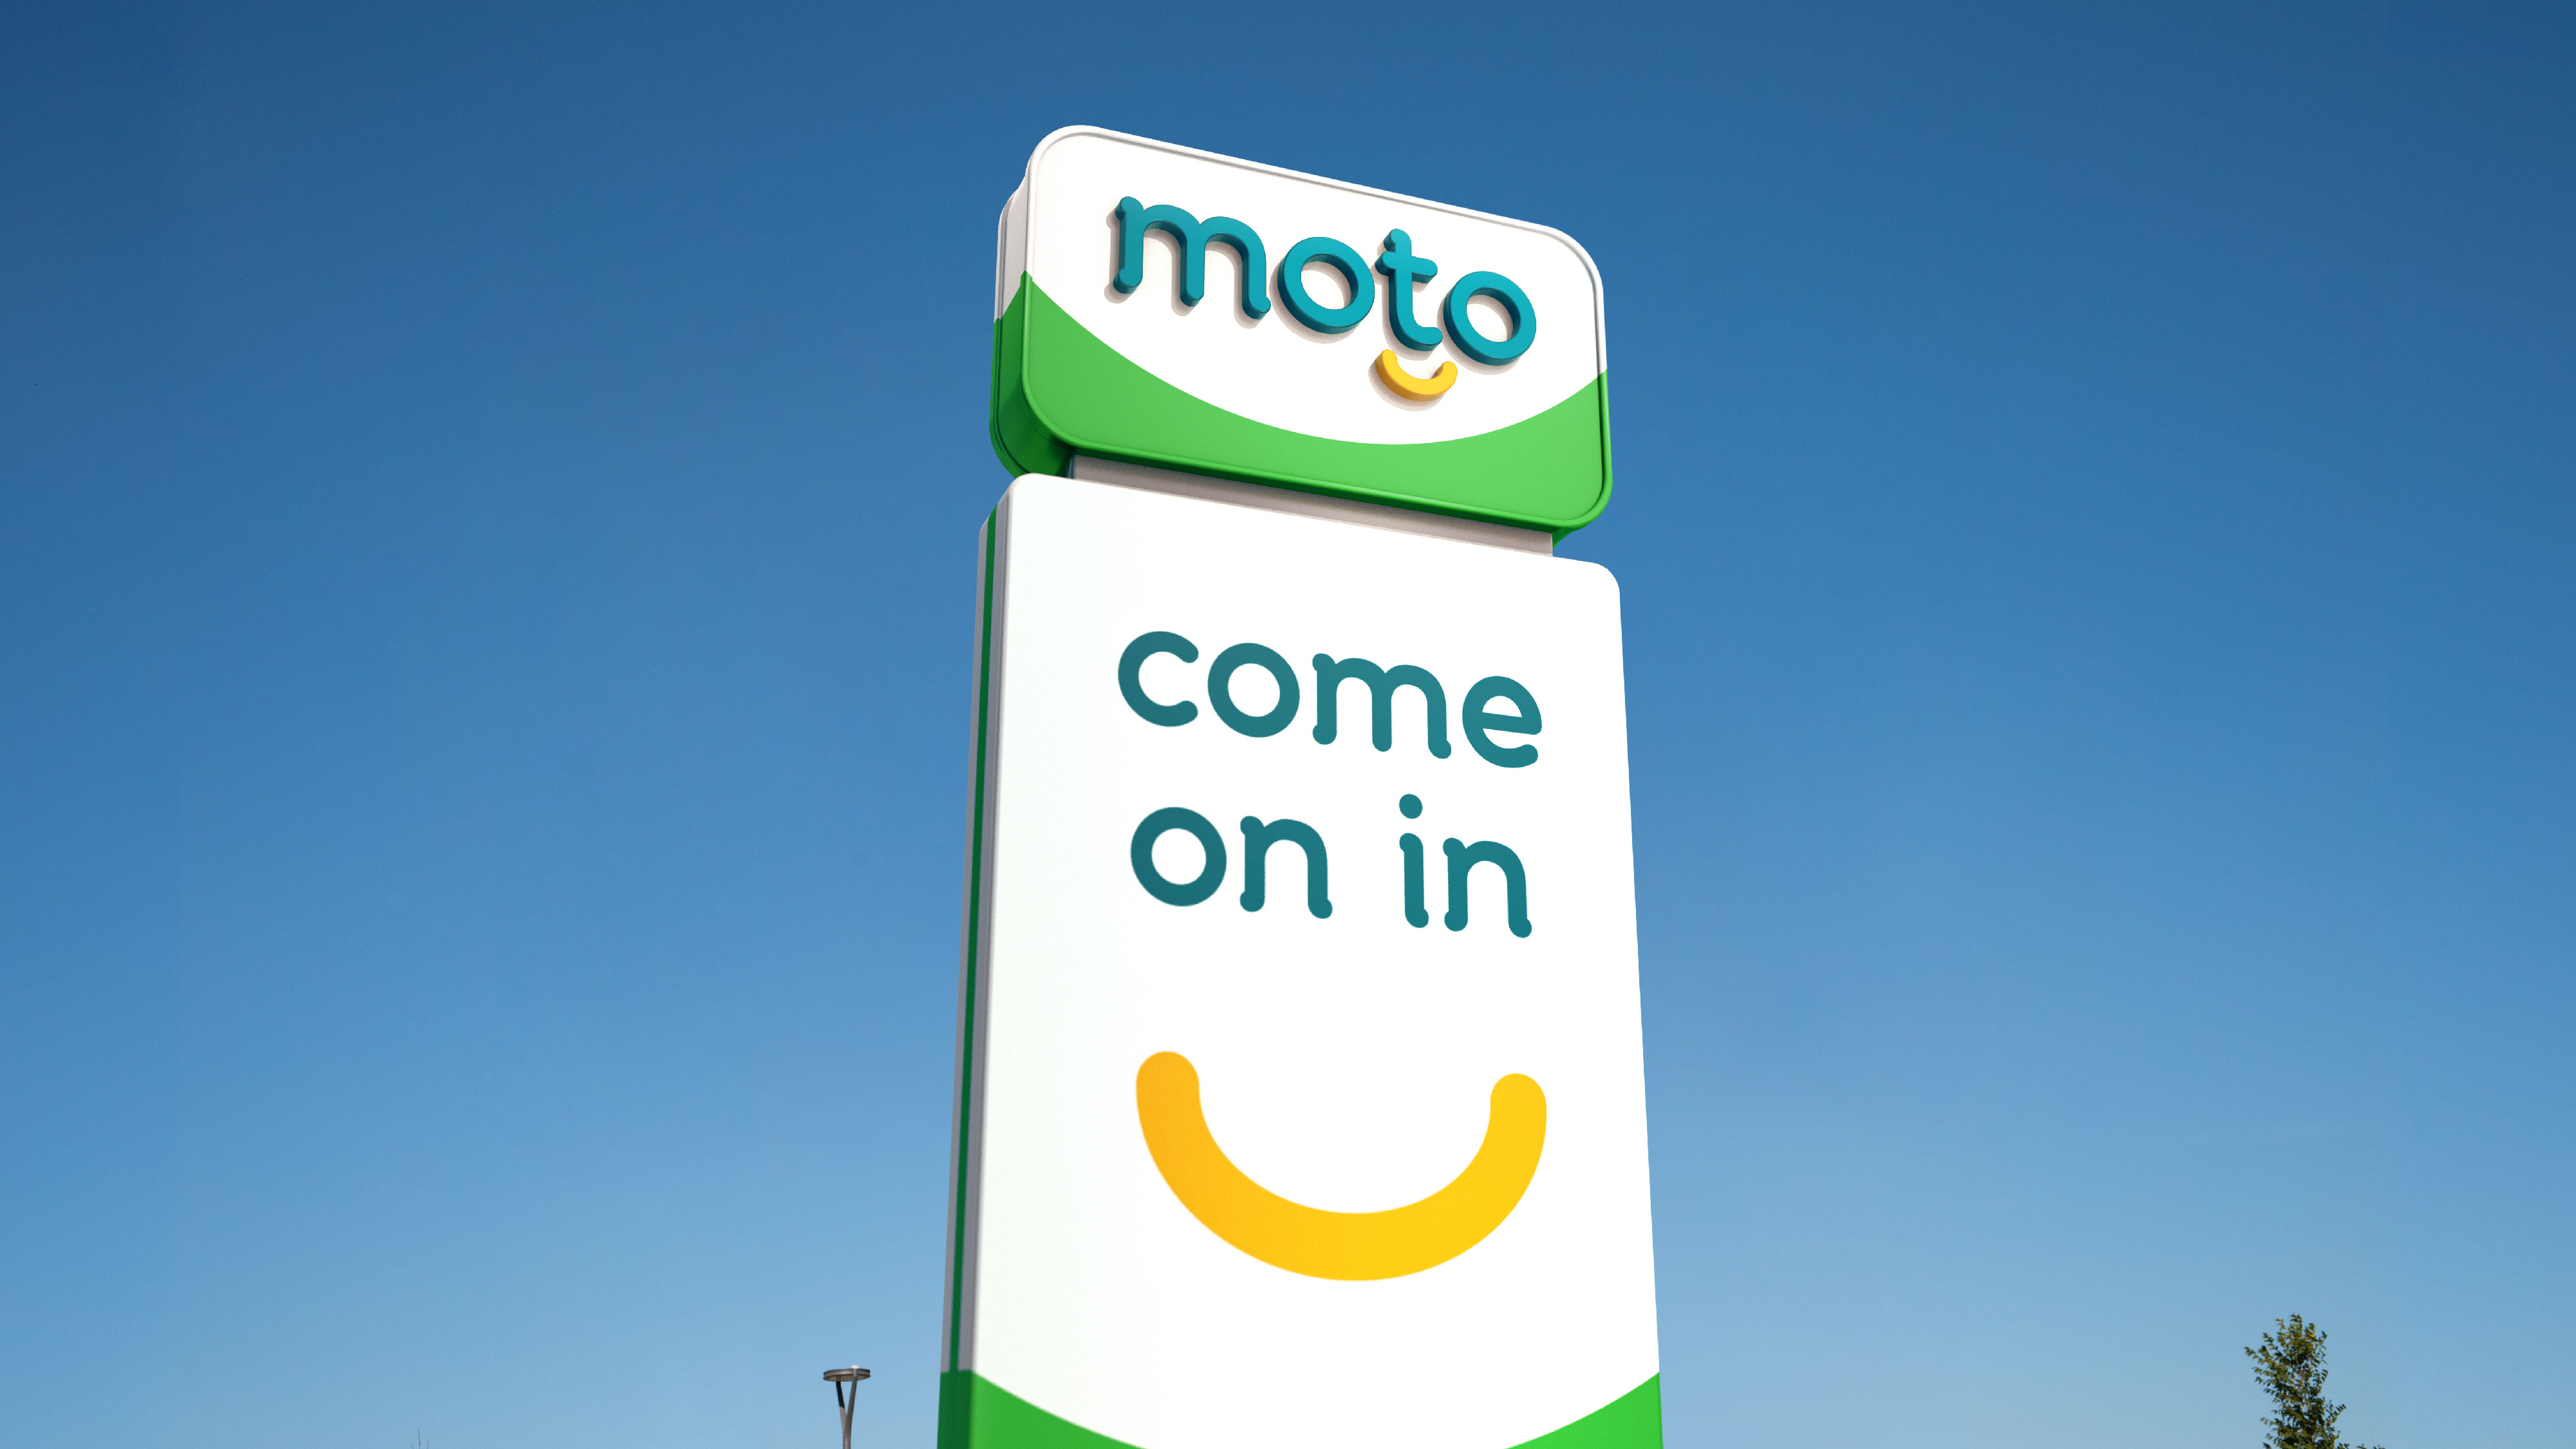 Moto Redefines the Travel Rest Stop Experience With Identity Overhaul